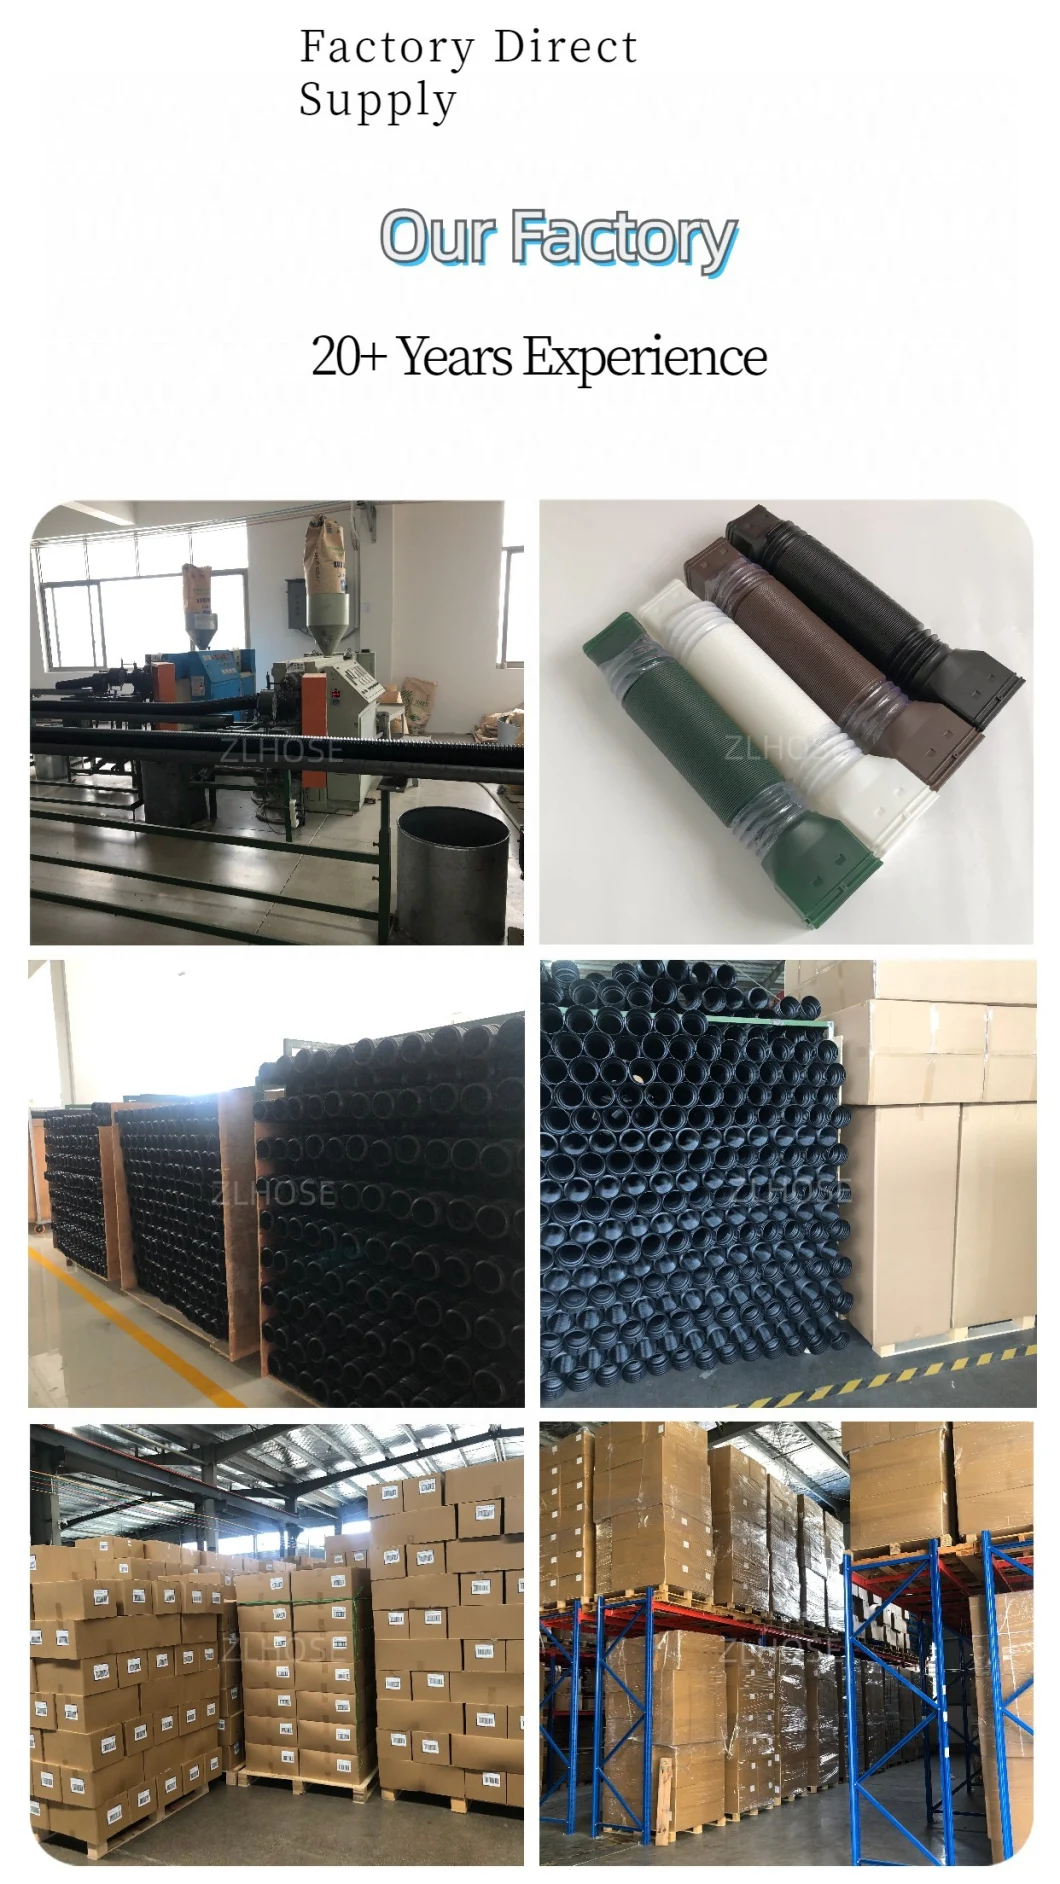 HDPE Flexible Pipe Perforated or Slotted with / Without Fabric Sock -012